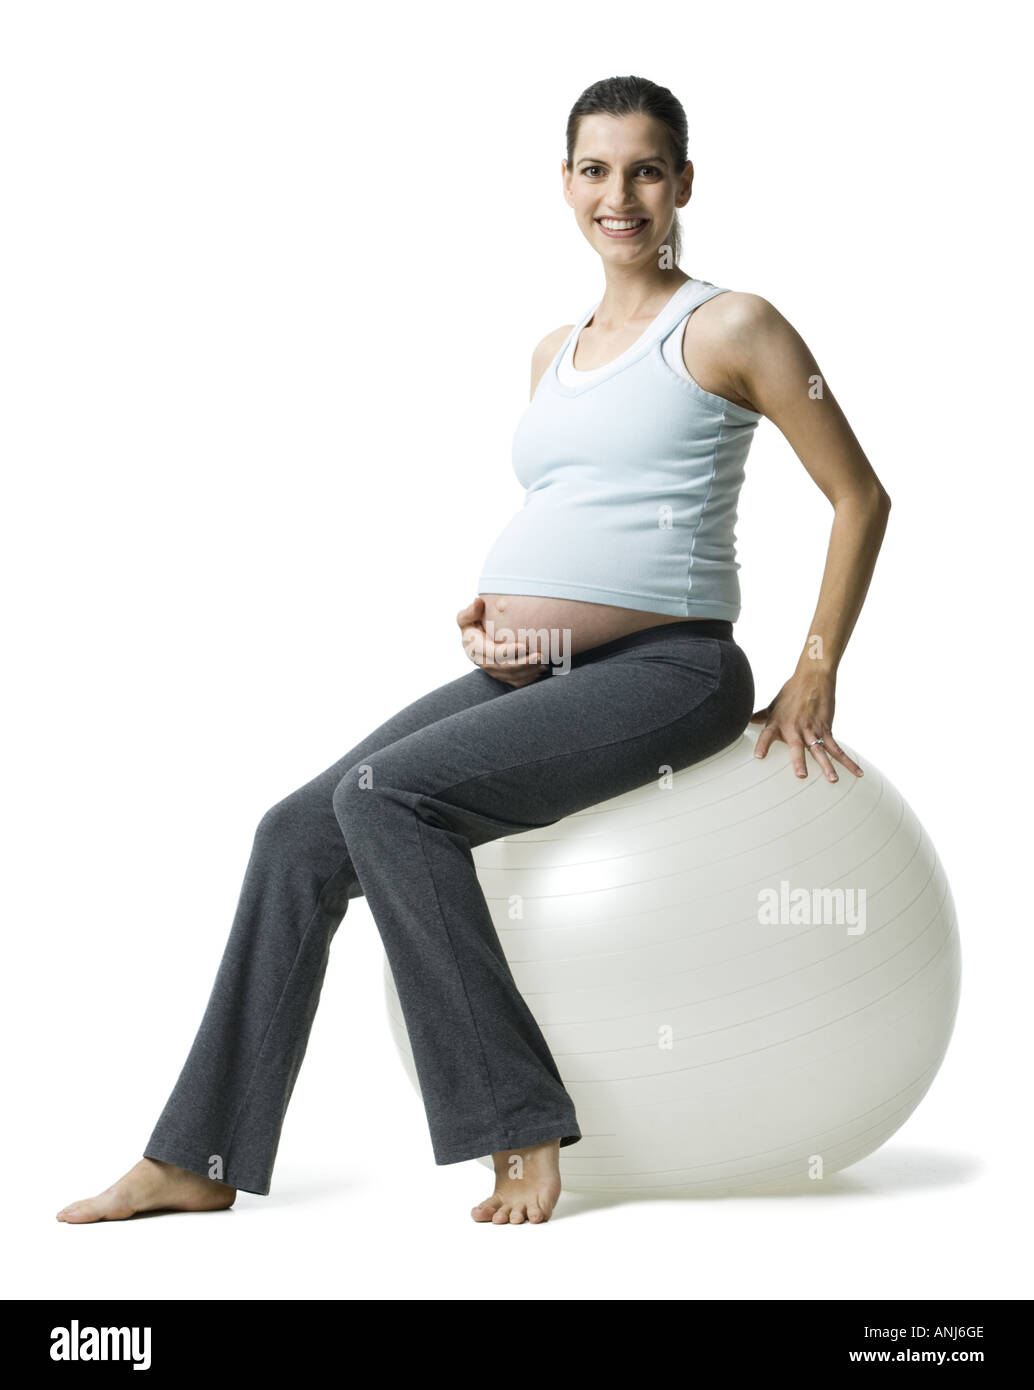 Portrait of a pregnant woman sitting on a fitness ball Stock Photo